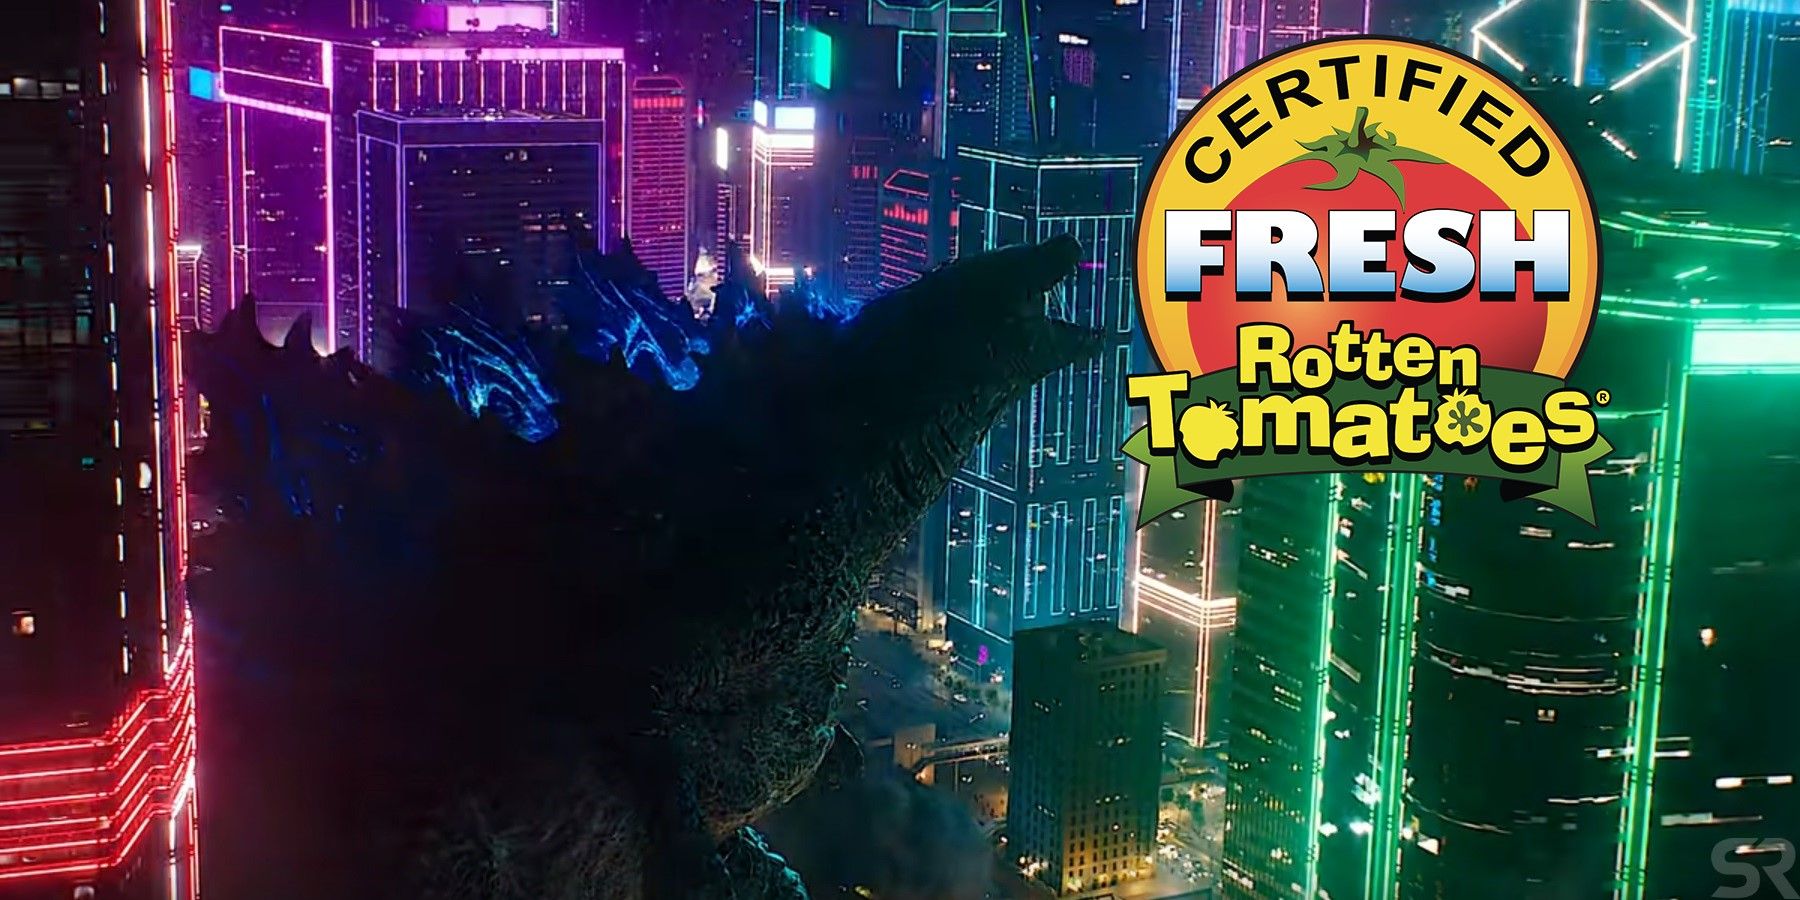 Godzilla vs. Kong is officially certified fresh on Rotten Tomatoes